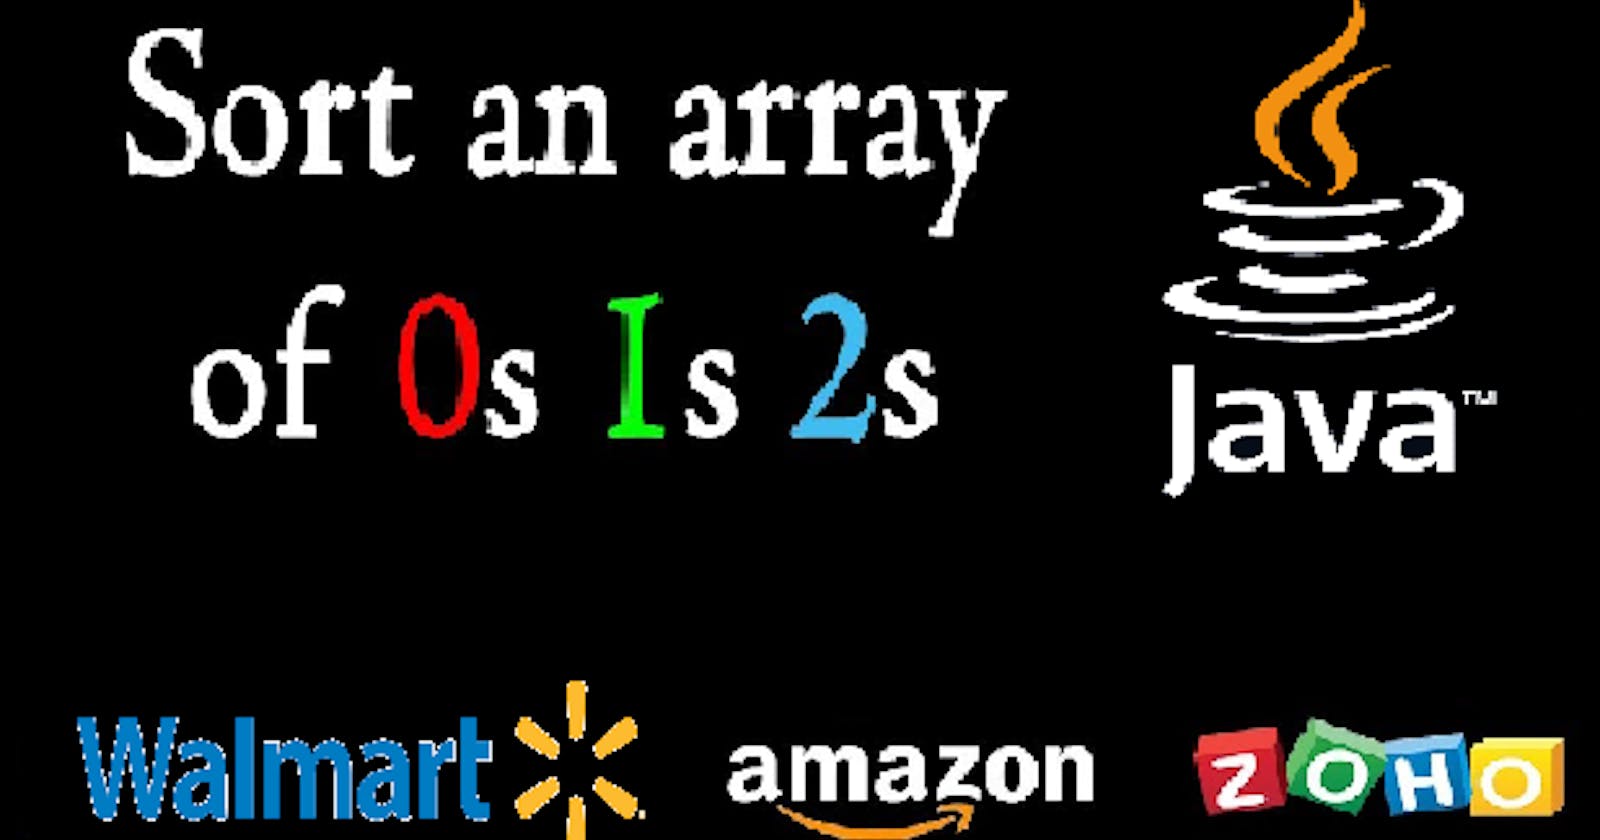 How to Sort an Array of 0s, 1s and 2s